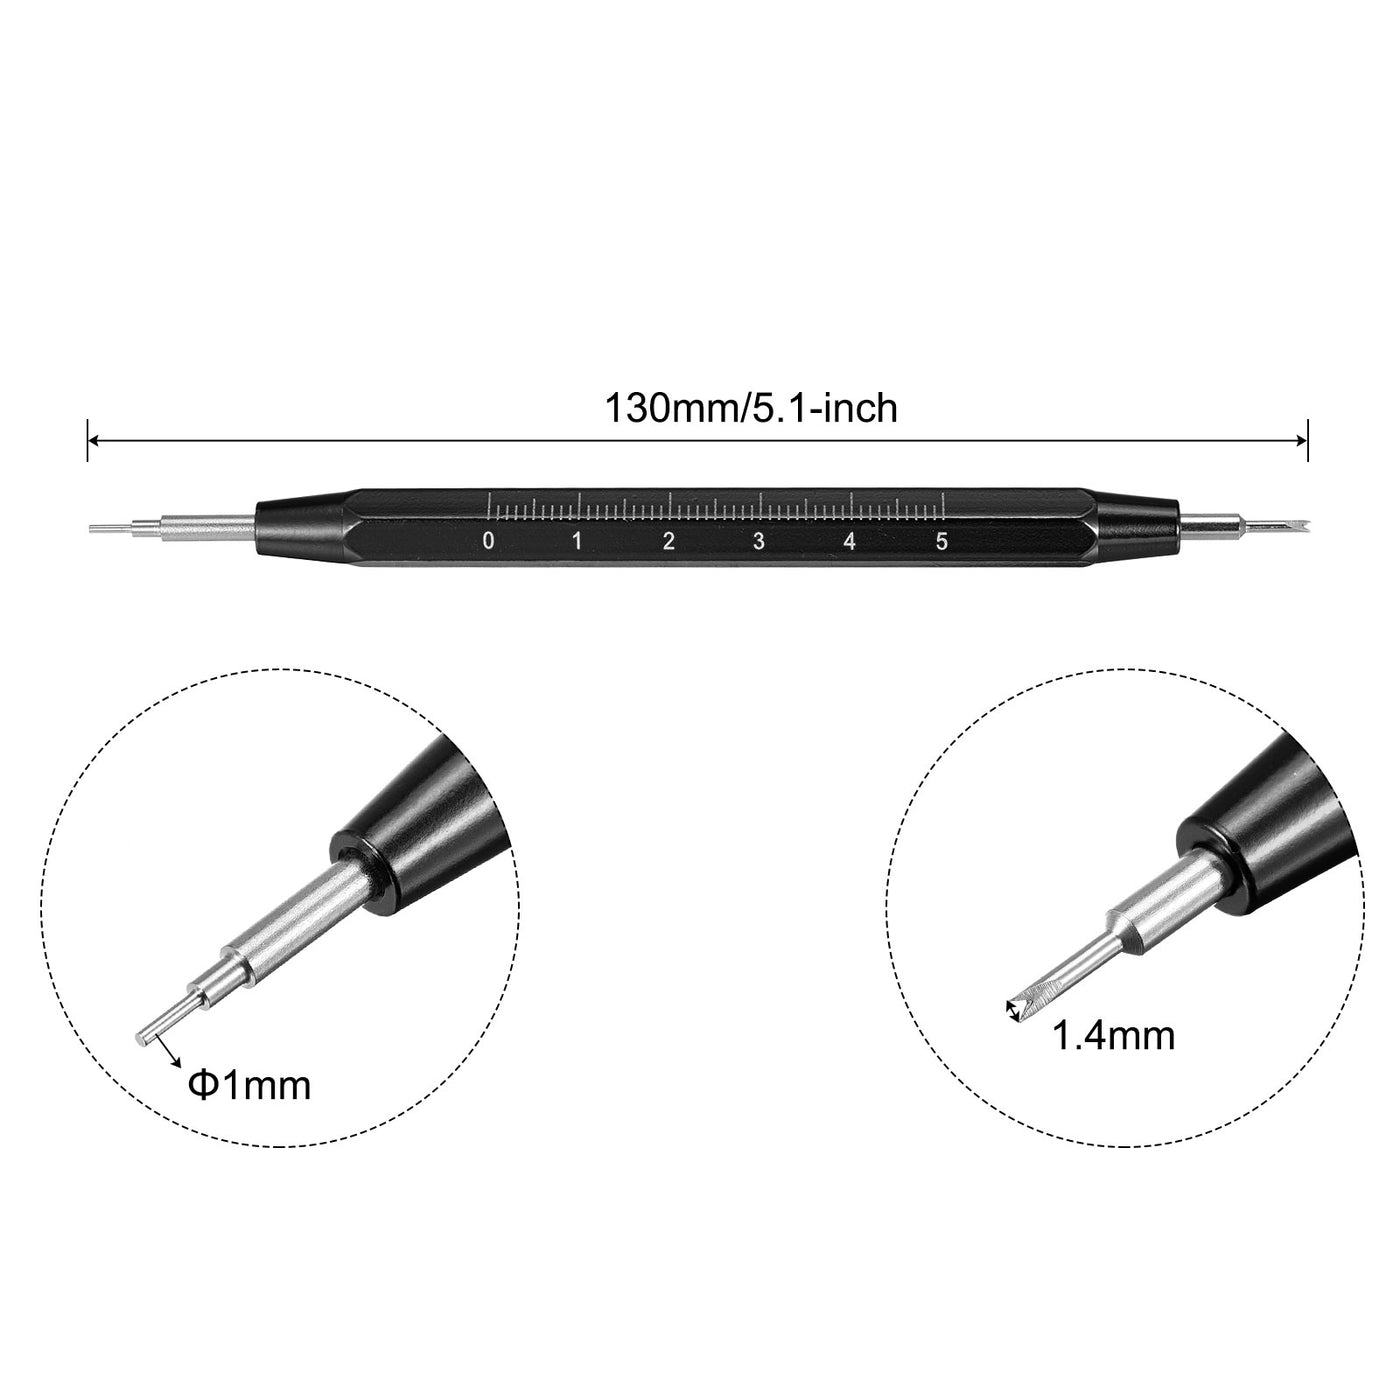 Uxcell Uxcell Watch Spring Bar Tool Double Tips Watch Spring Link Pin Removal Tool with Metric Scale for Watch Repair, Black